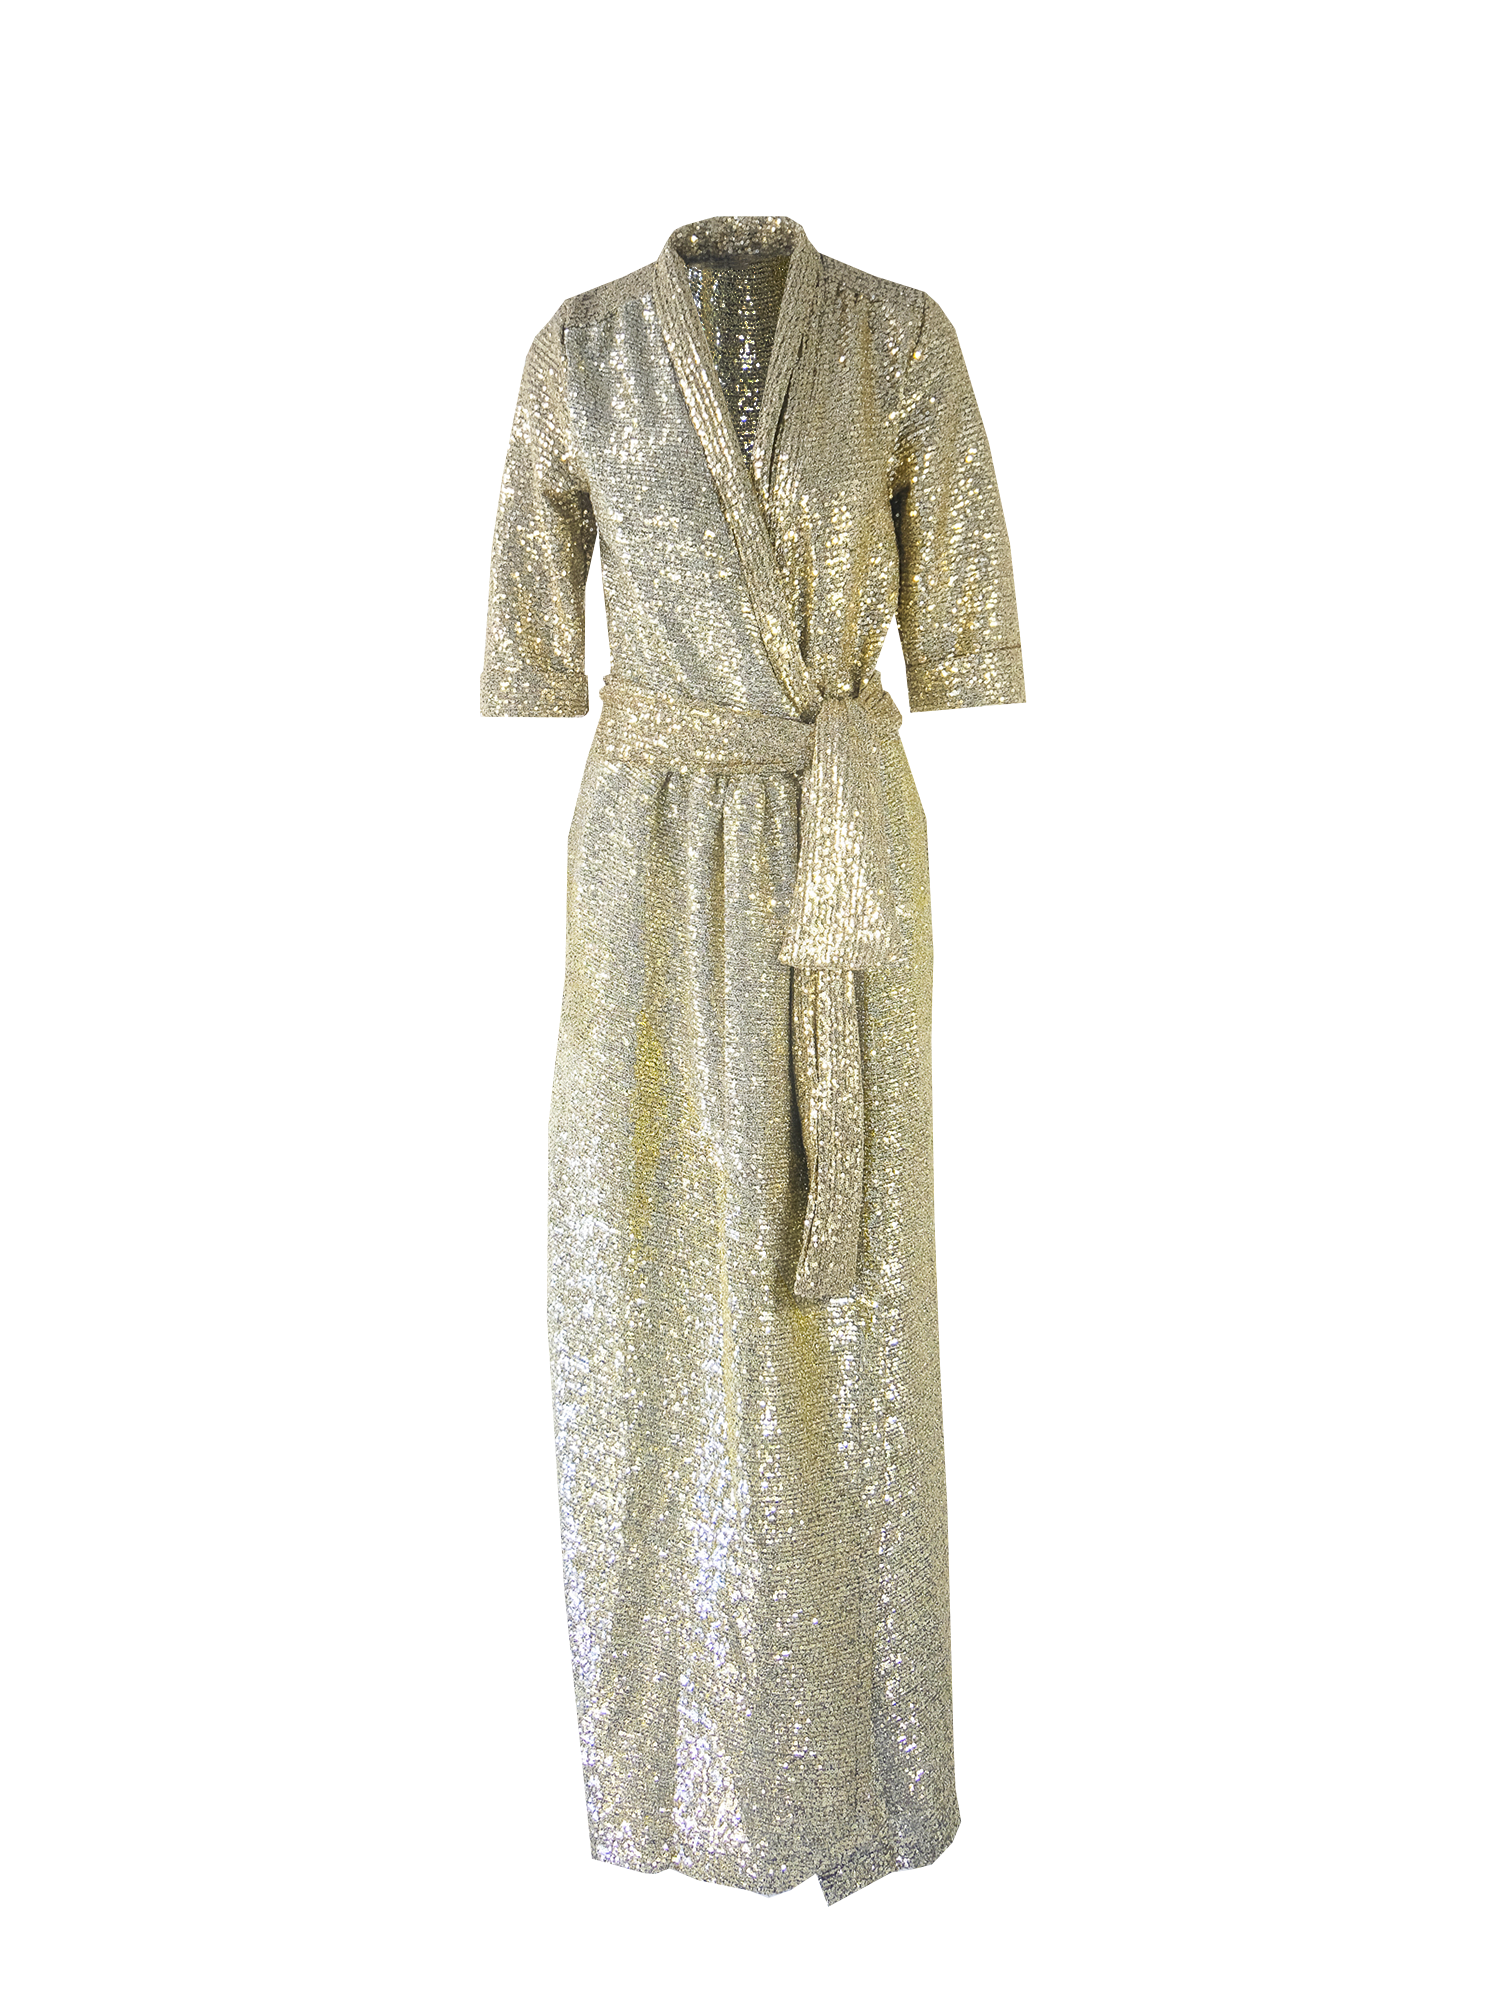 GINEVRA - long dress in gold sequin